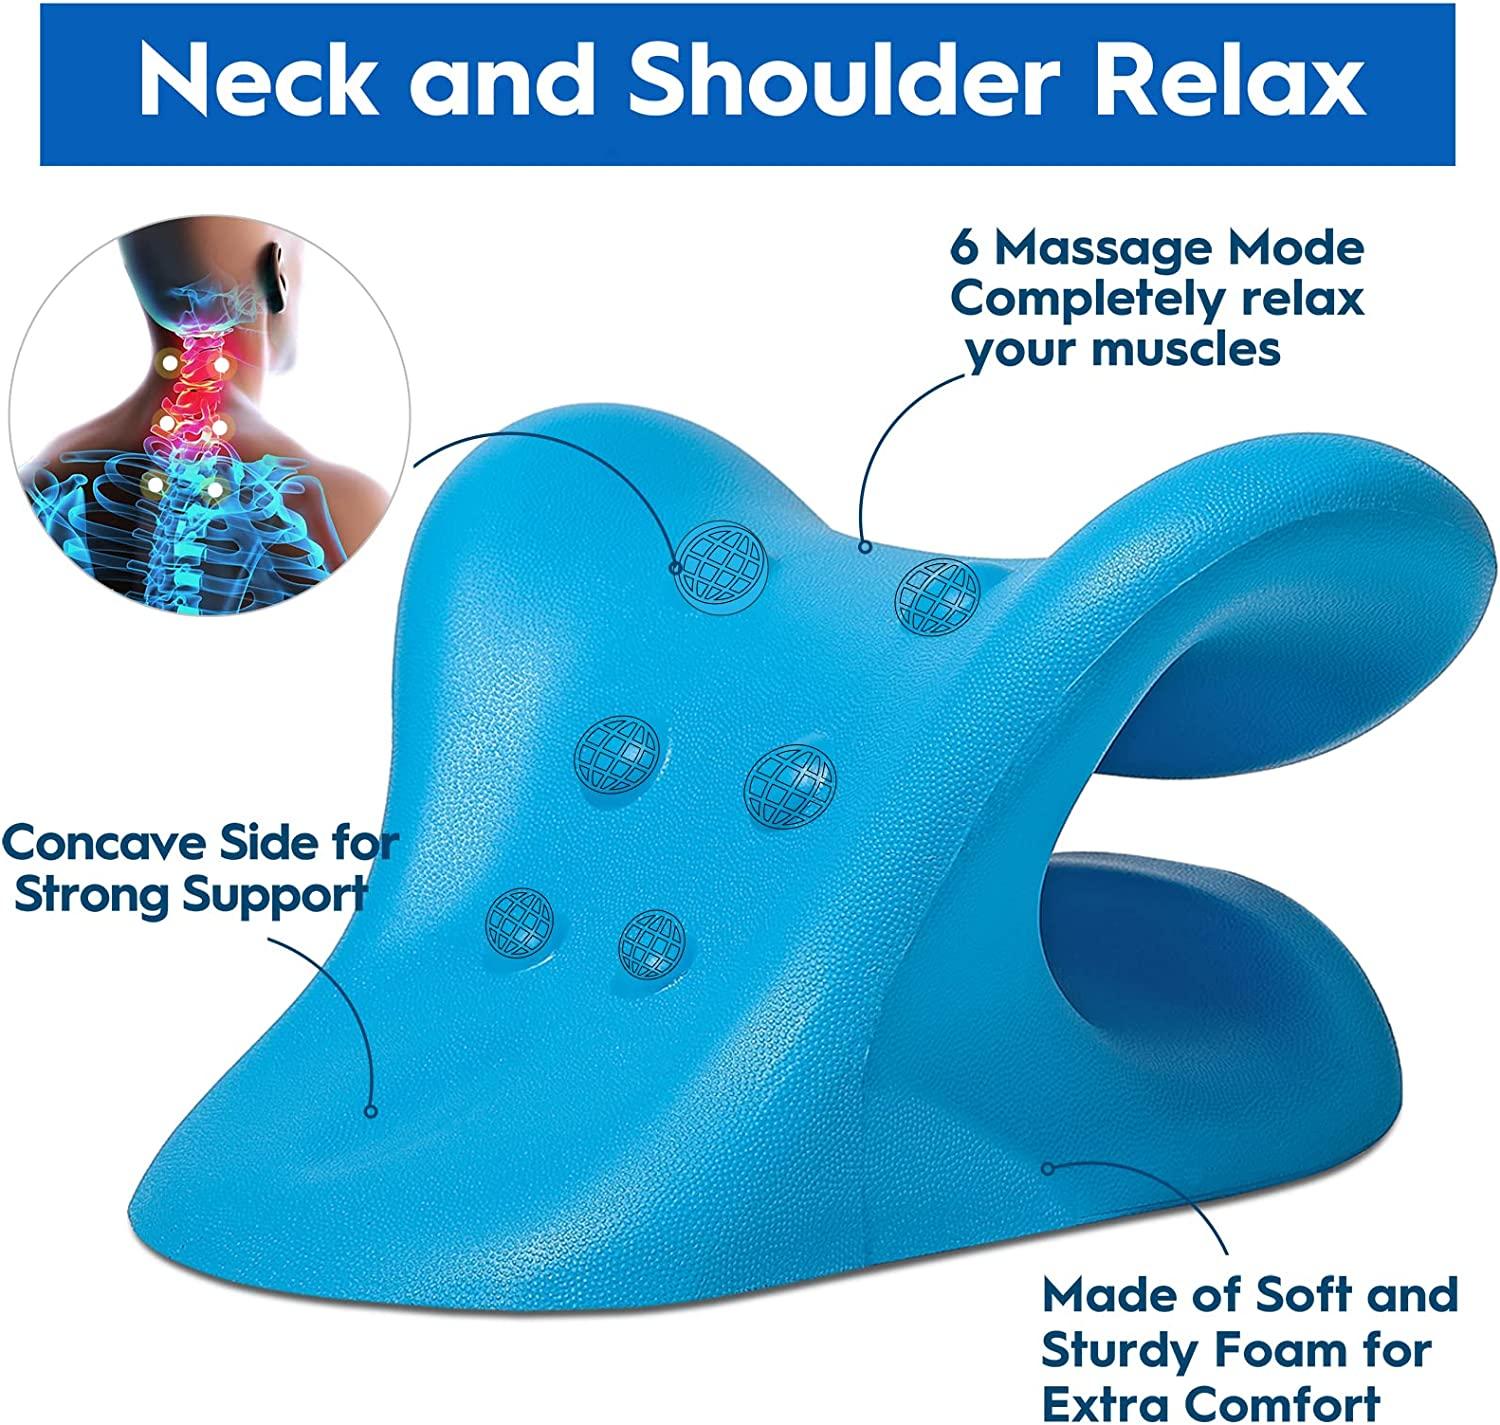 Guffo Neck Stretcher Cervical Traction Device, Neck and Shoulder Relaxer  for TMJ Headache Relief and Spine Alignment, with Acupressure Massag Design  Neck Pain Pillow for Muscle Tension Relief Black